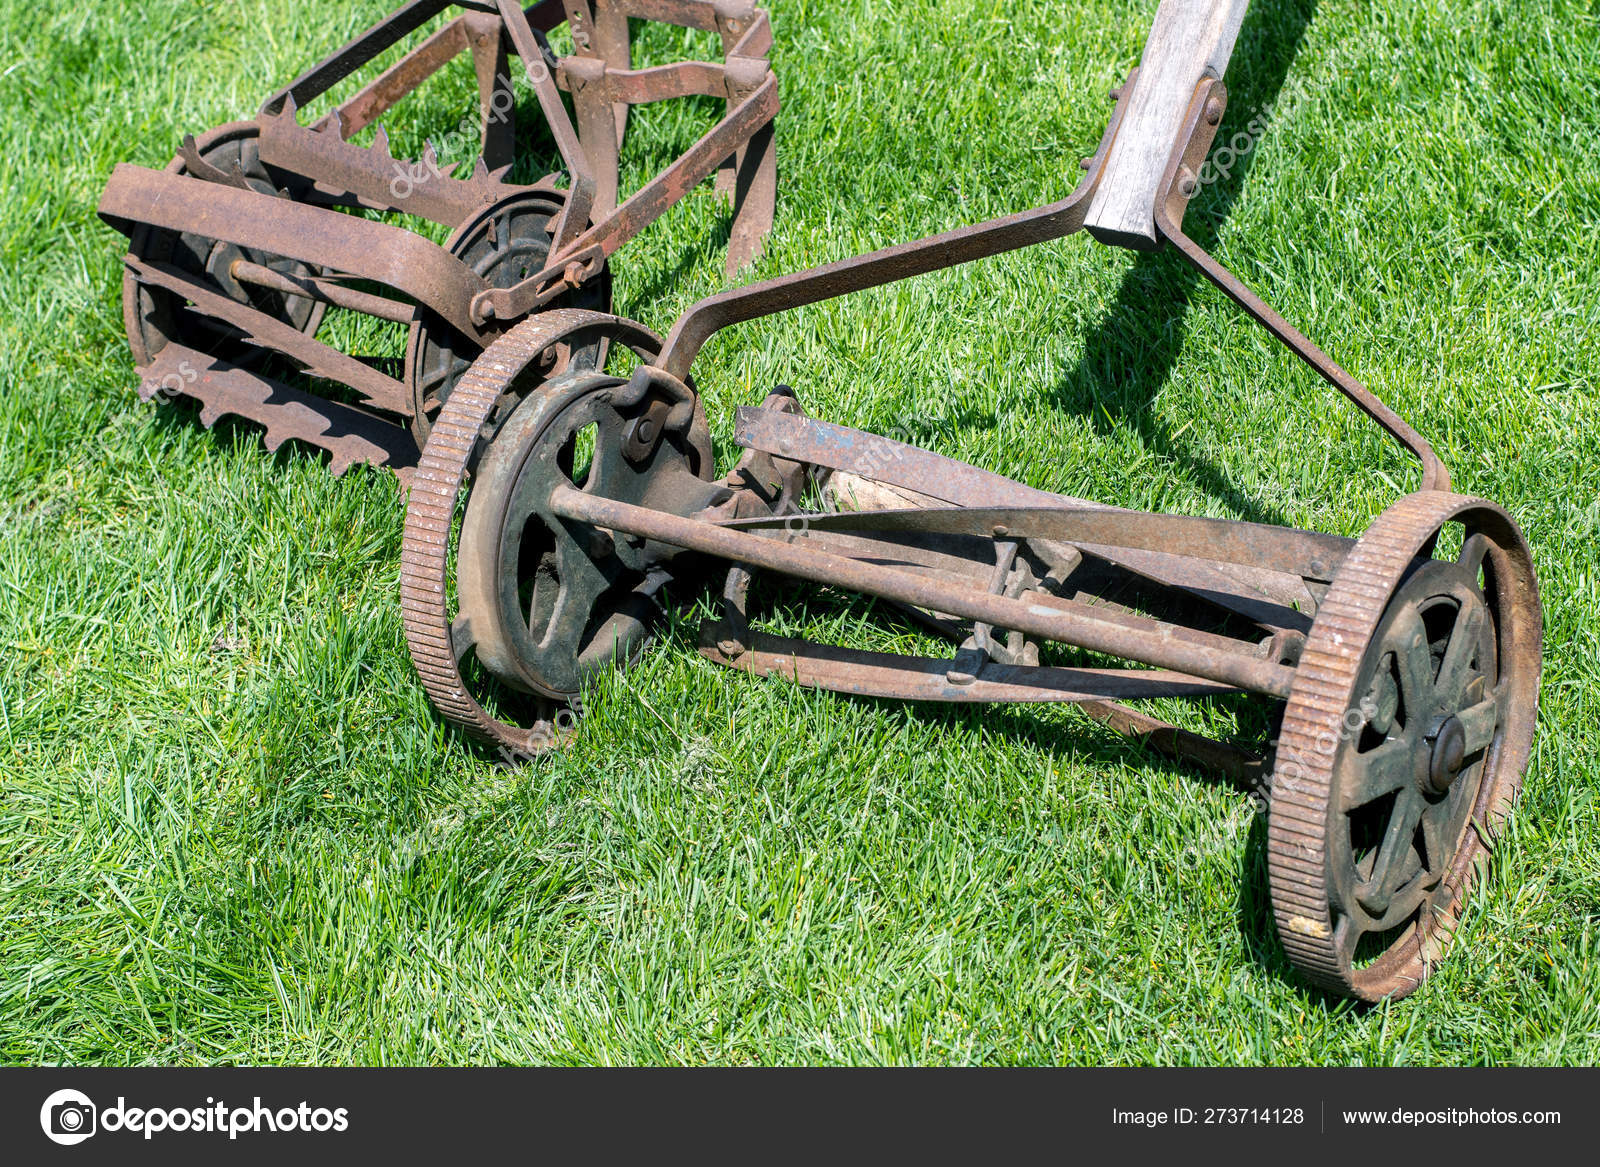 Vintage lawn mowers — Stock Photo © inyrdreams #273714128